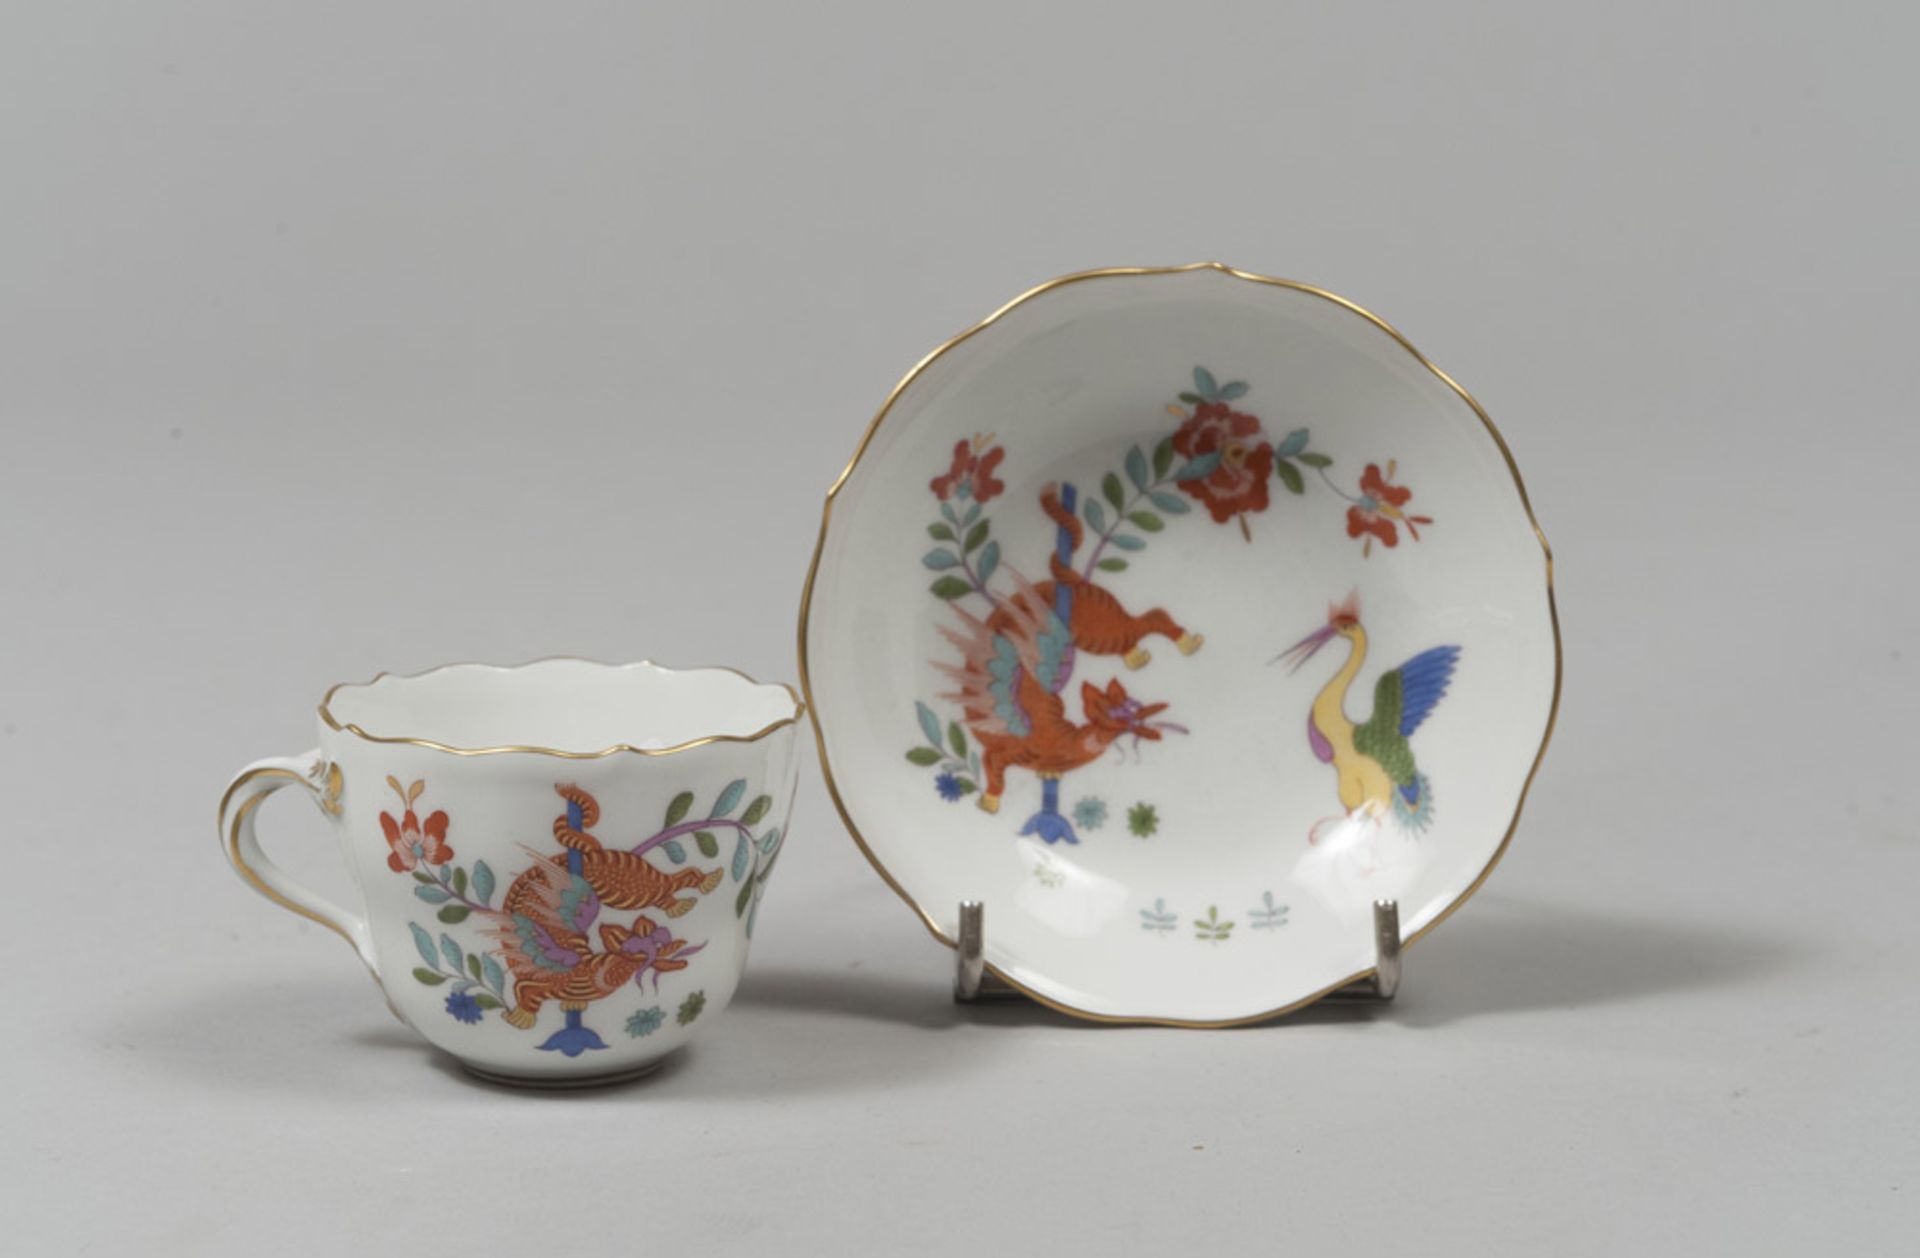 PORCELAIN CUP AND SAUCER, MEISSEN 20TH CENTURY